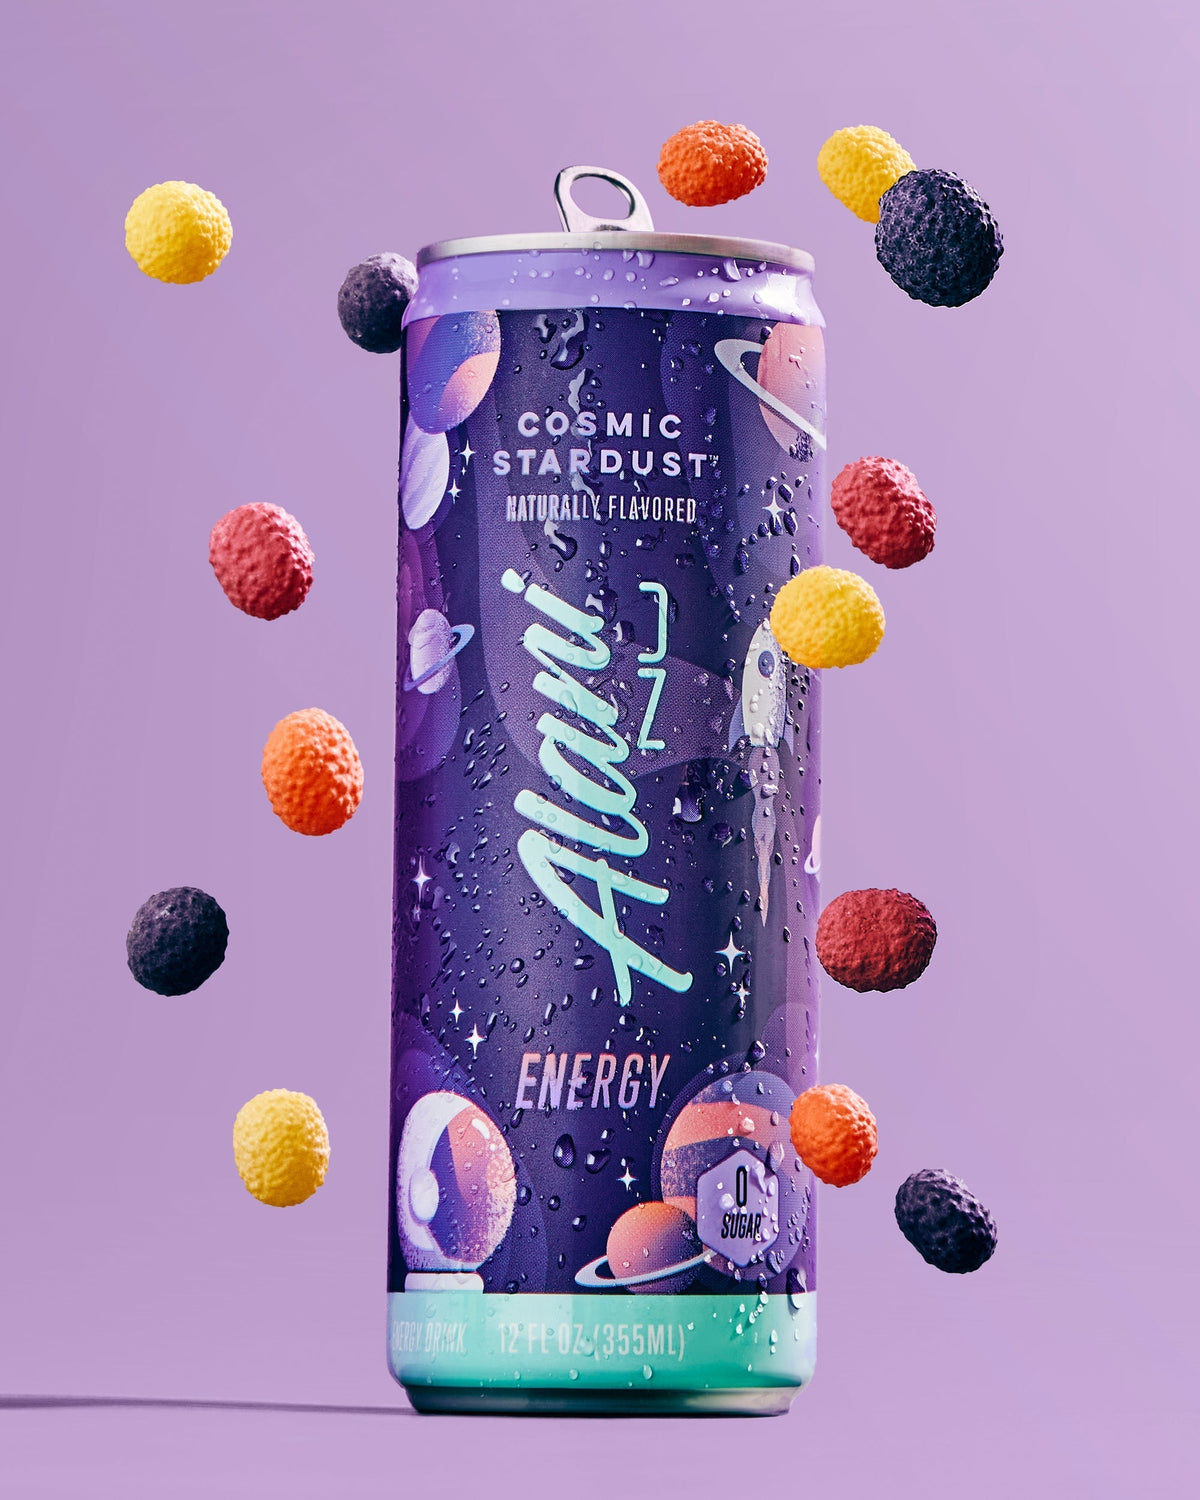 A energy drink in Cosmic Stardust flavor surrounded by candy.